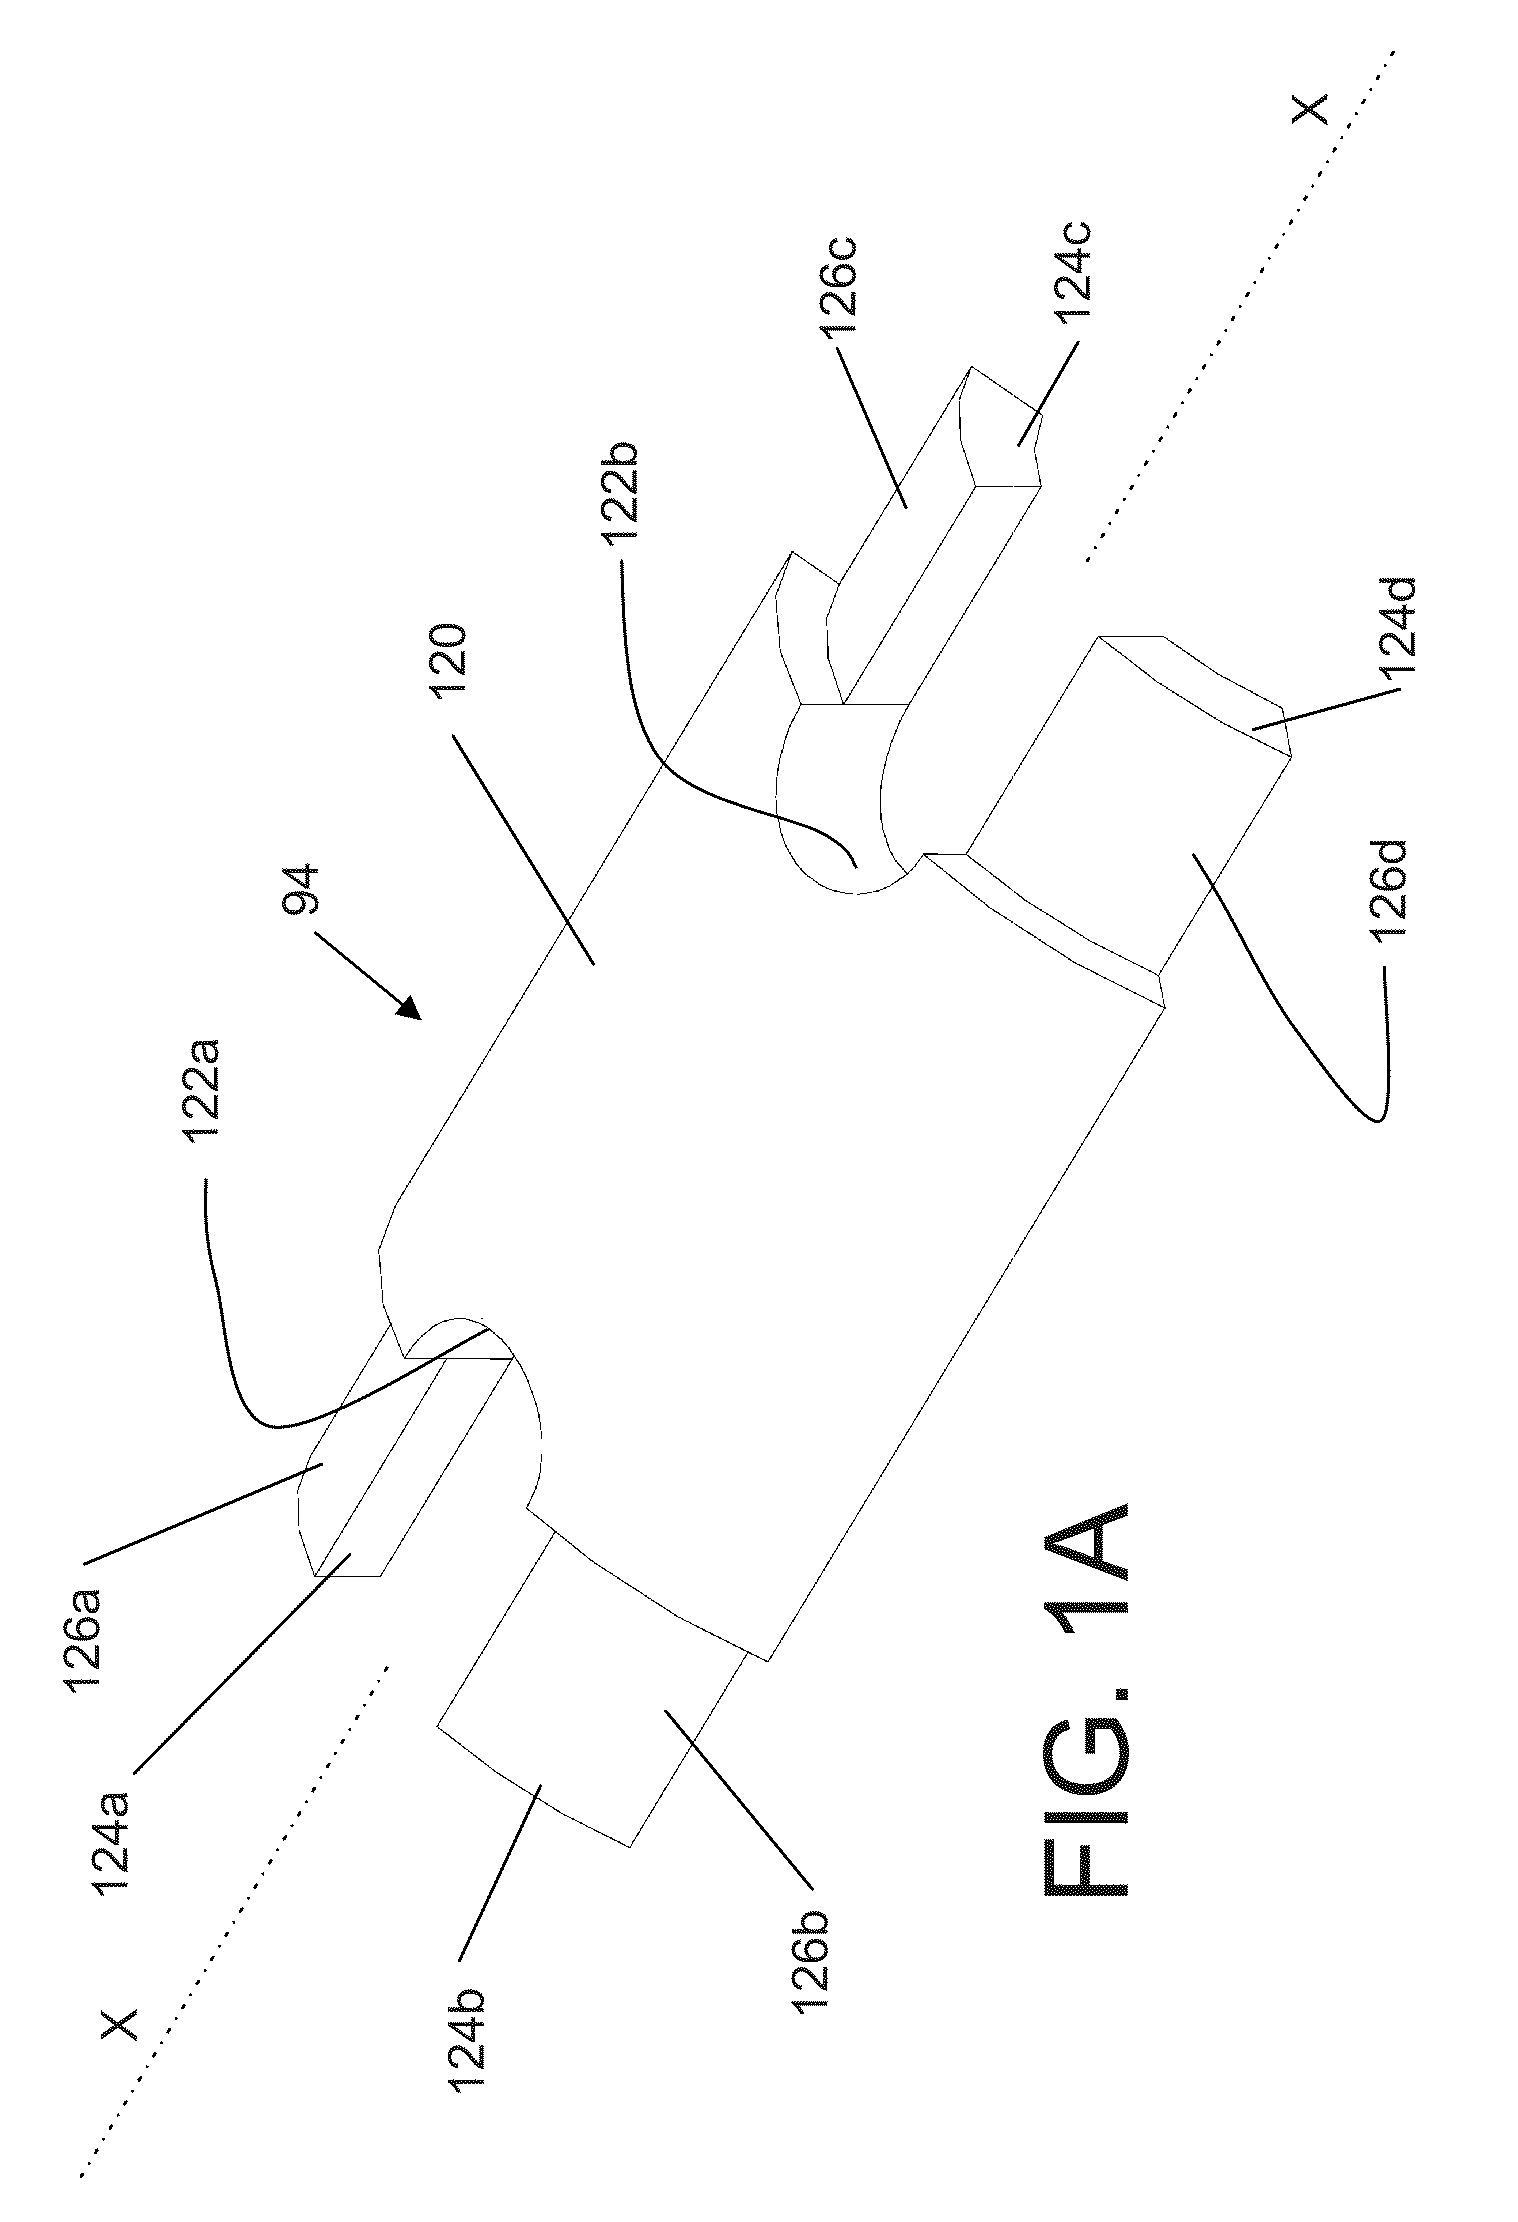 Method of fabricating stimulation lead by fusing connector segment between lead body and electrode portion of the lead